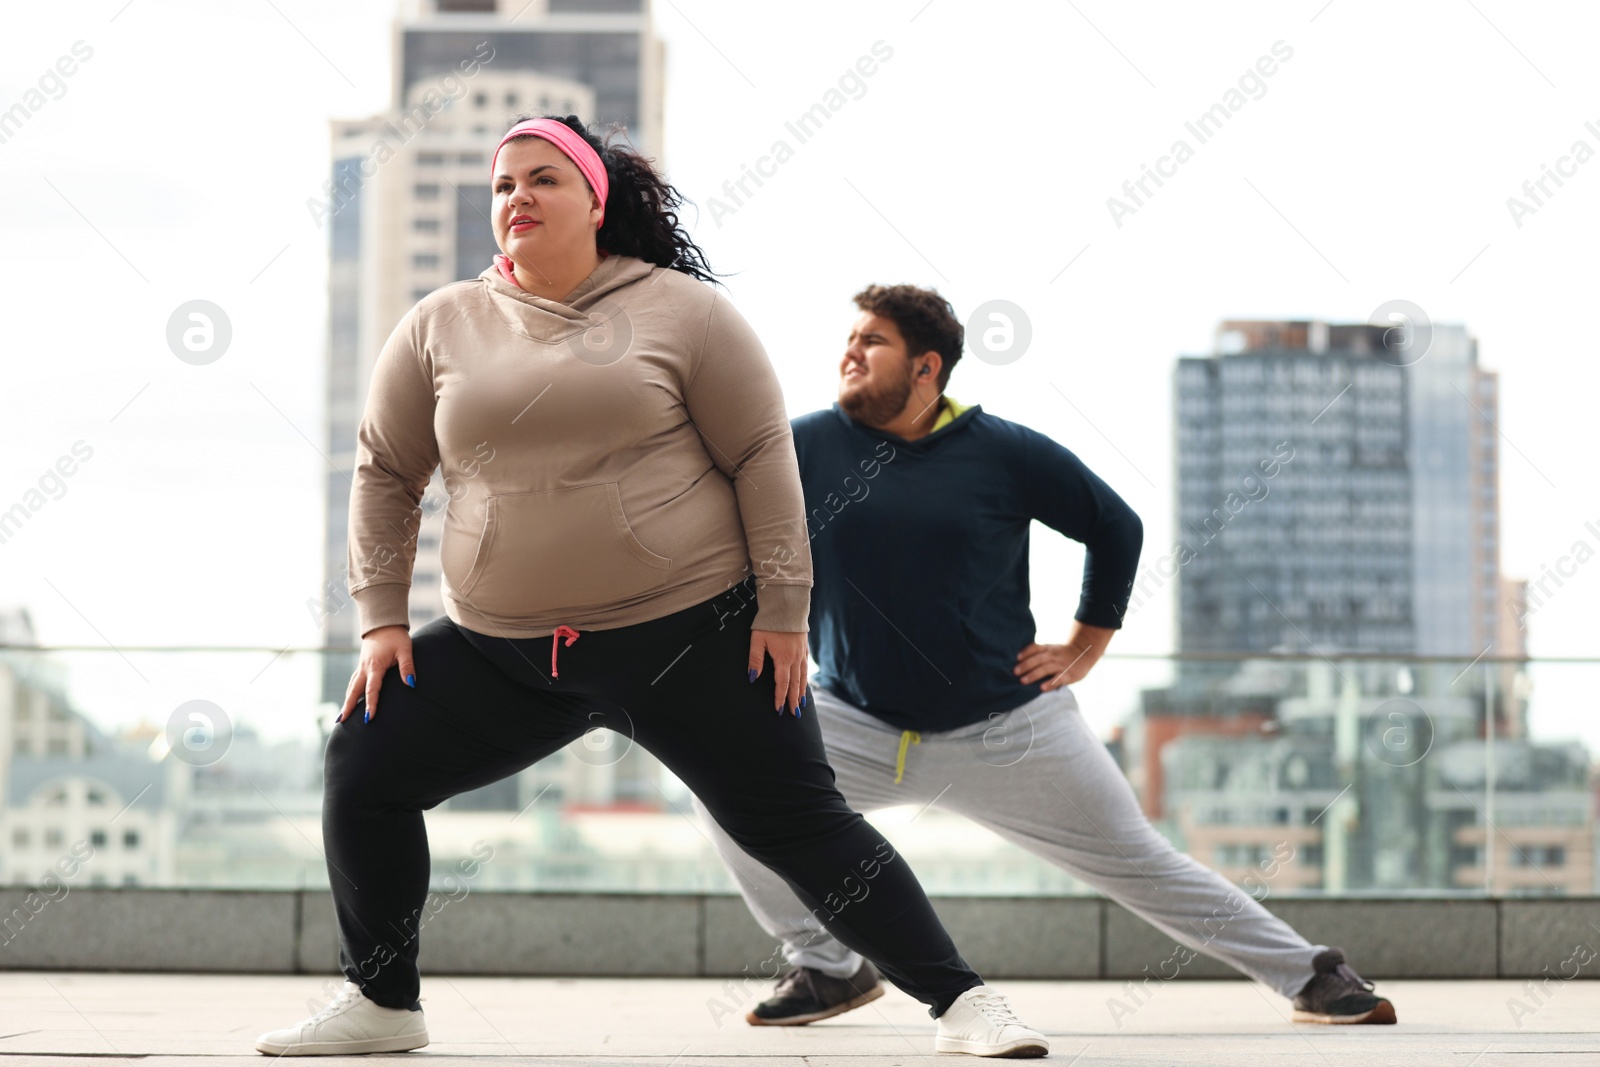 Photo of Overweight couple doing sport exercises together outdoors